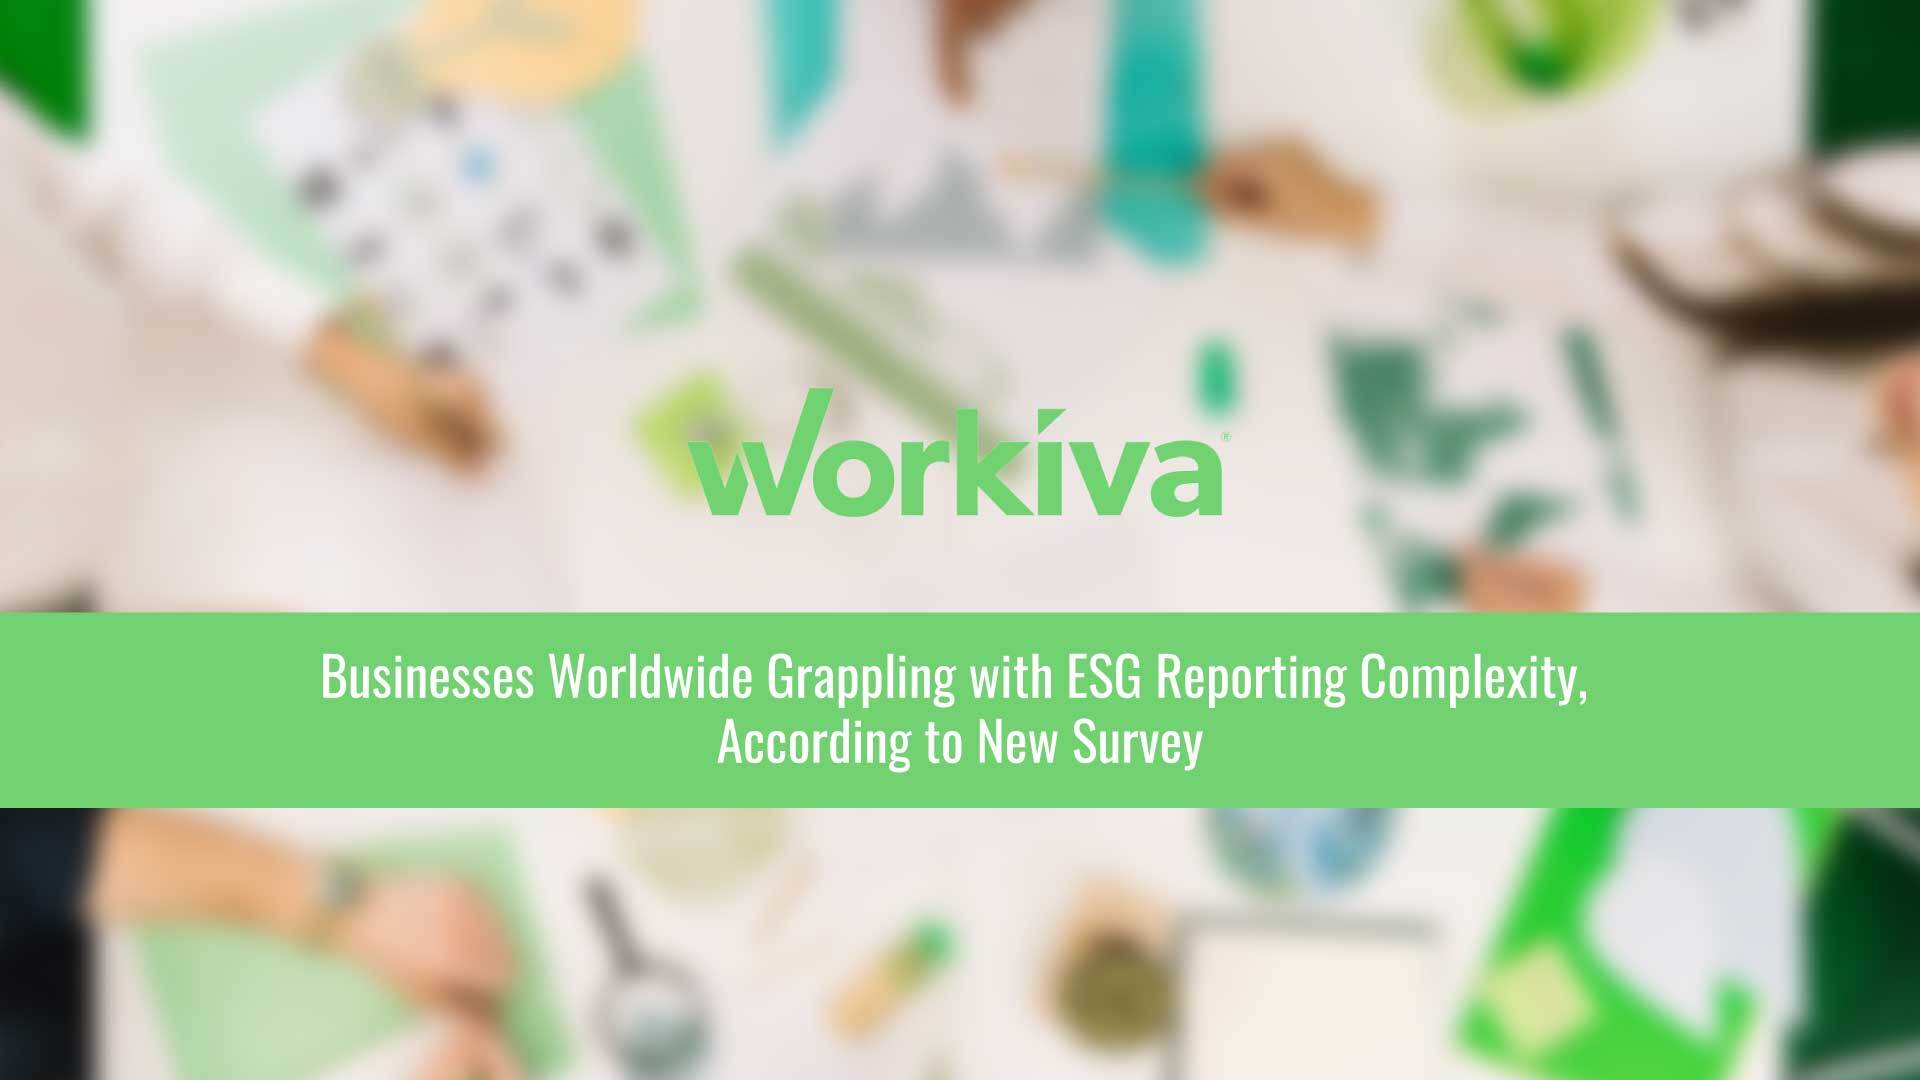 Businesses Worldwide Grappling with ESG Reporting Complexity, According to New Survey by Workiva